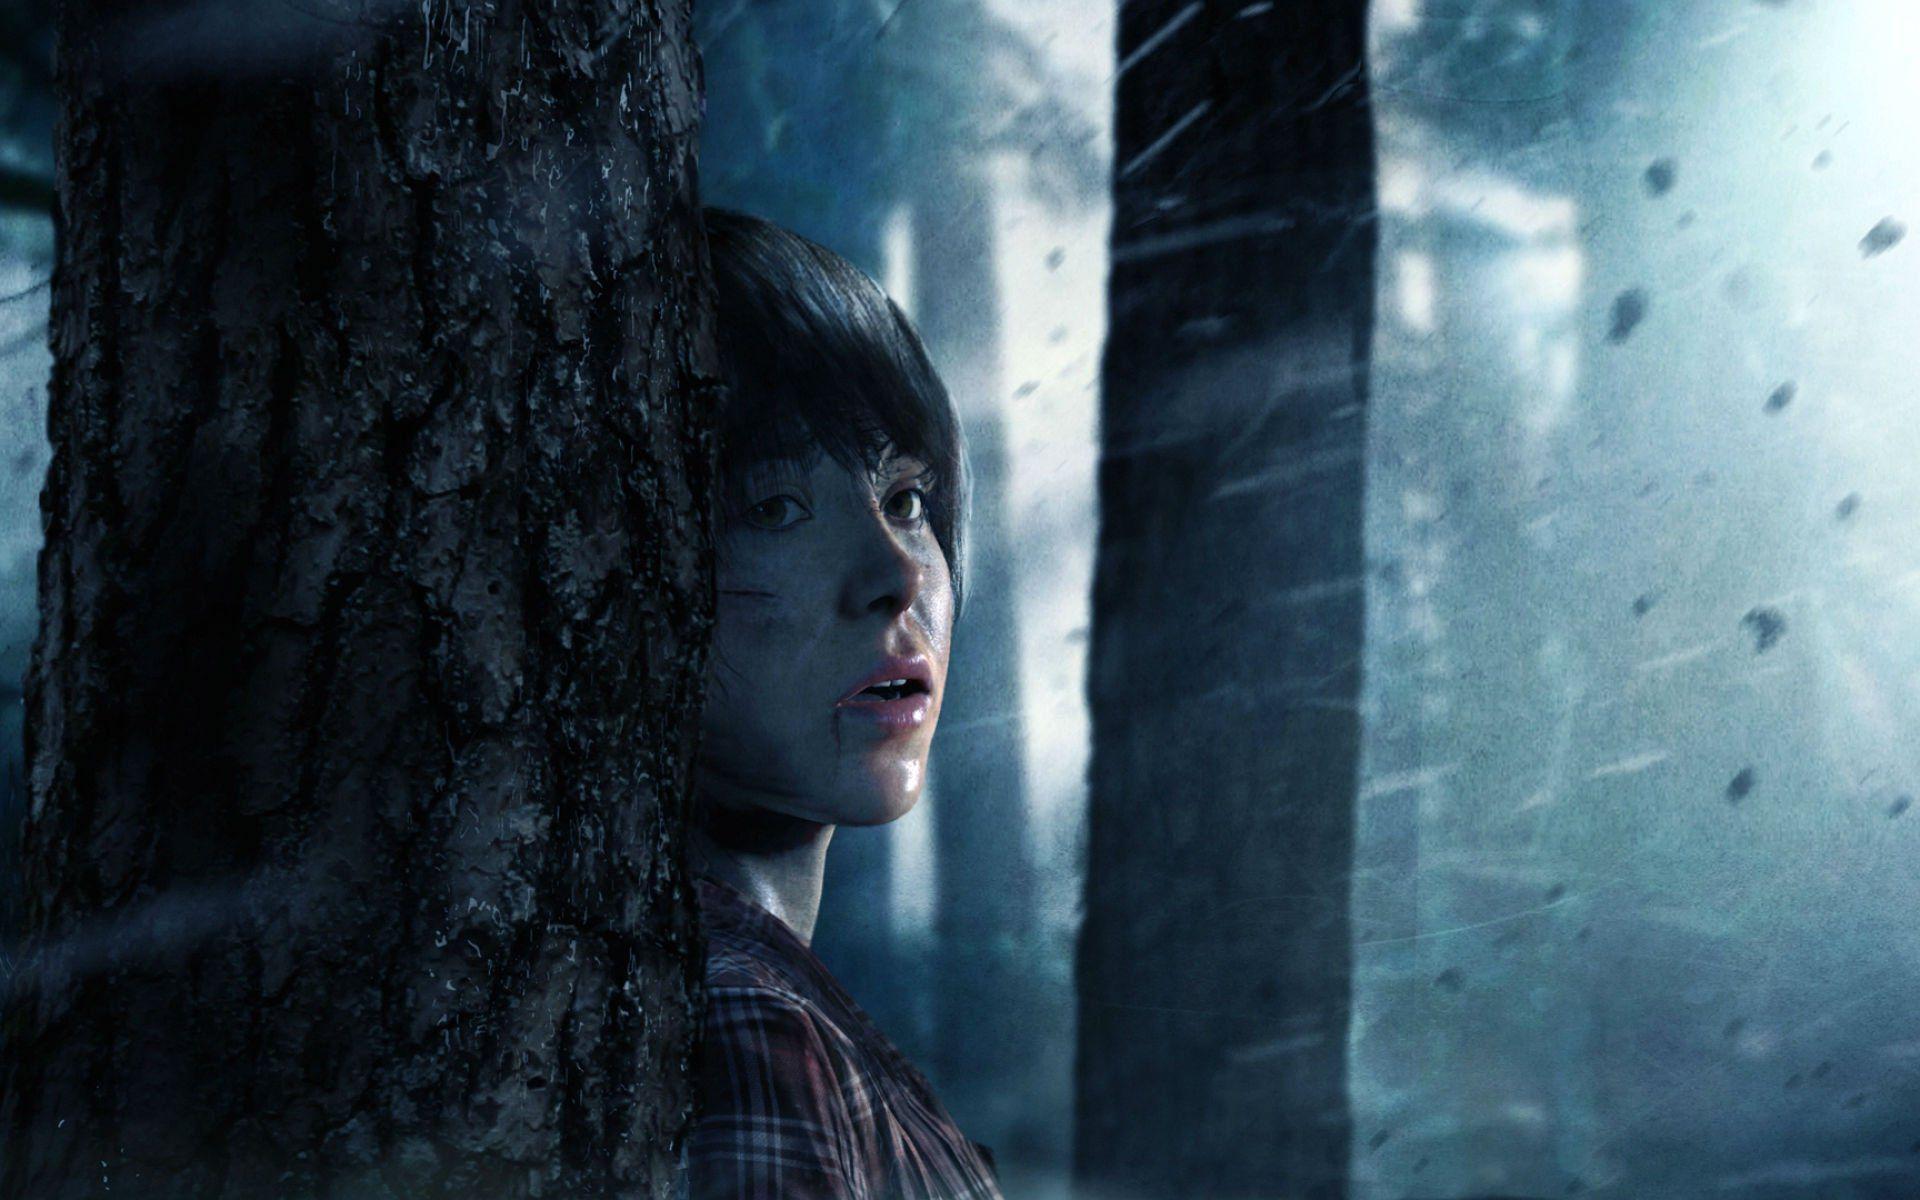 Image Gallery of Beyond Two Souls Wallpaper iPad